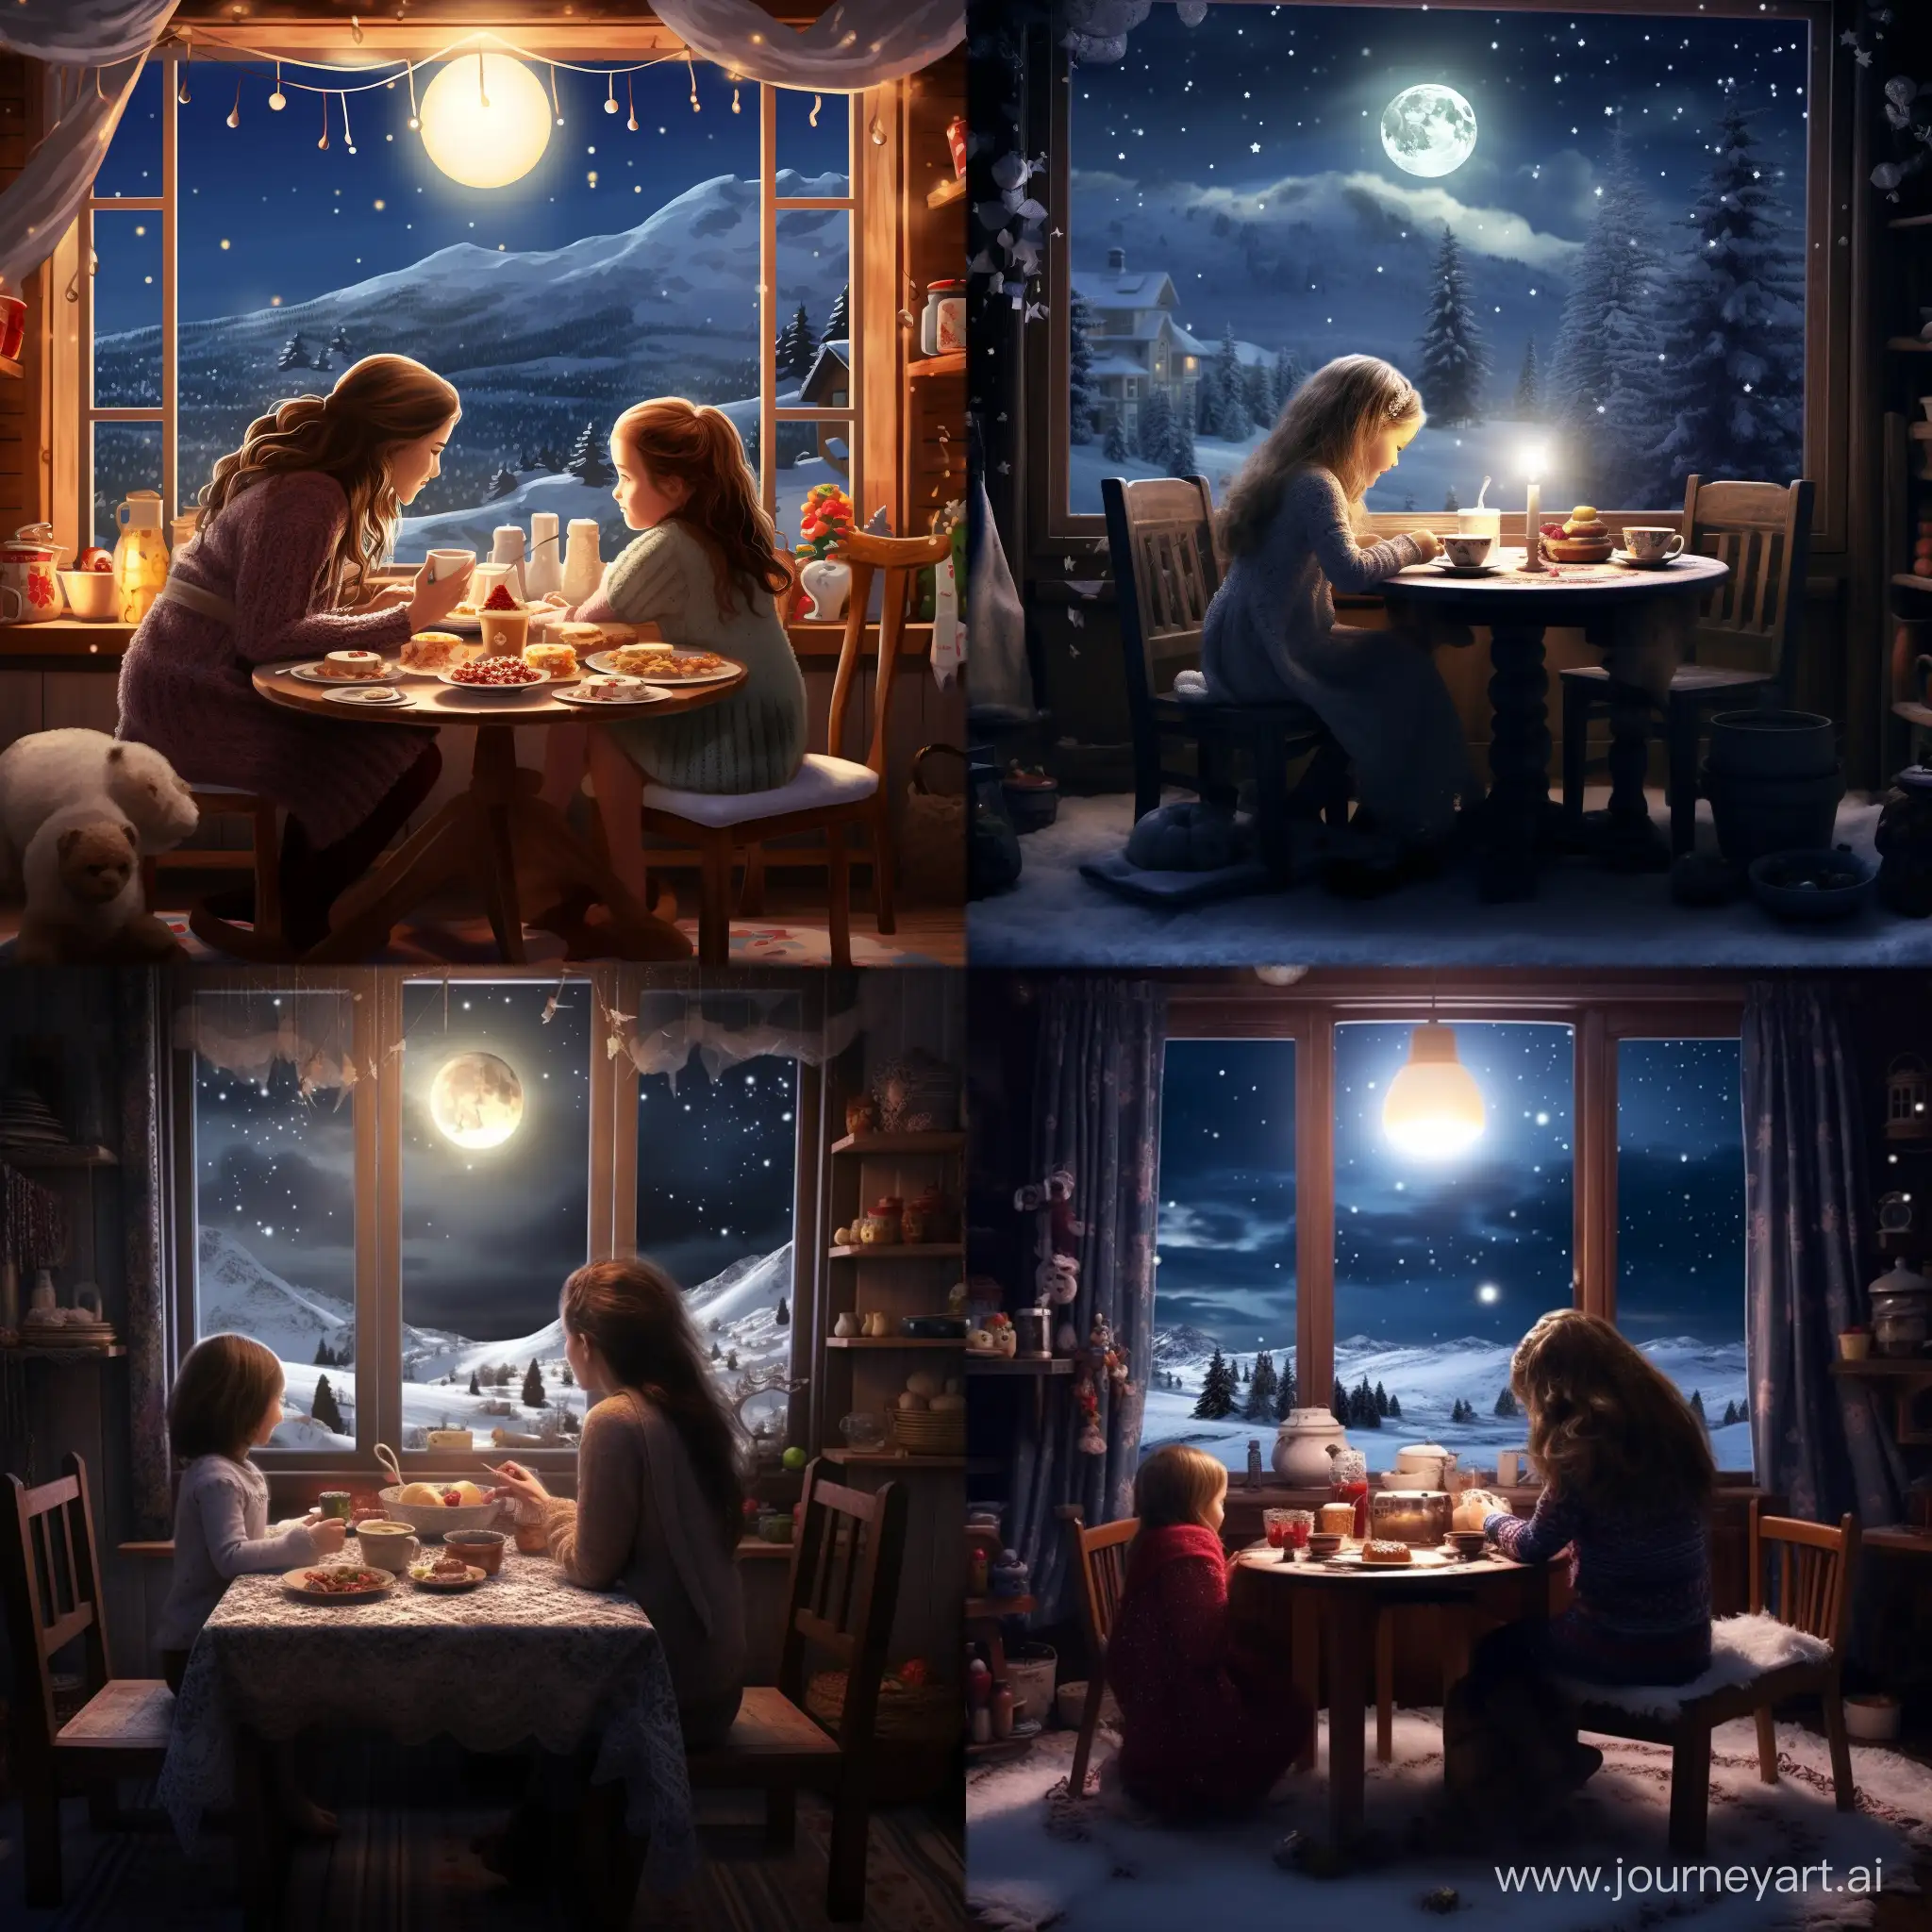 Adorable-MotherDaughter-Dinner-Scene-with-Snowfall-View